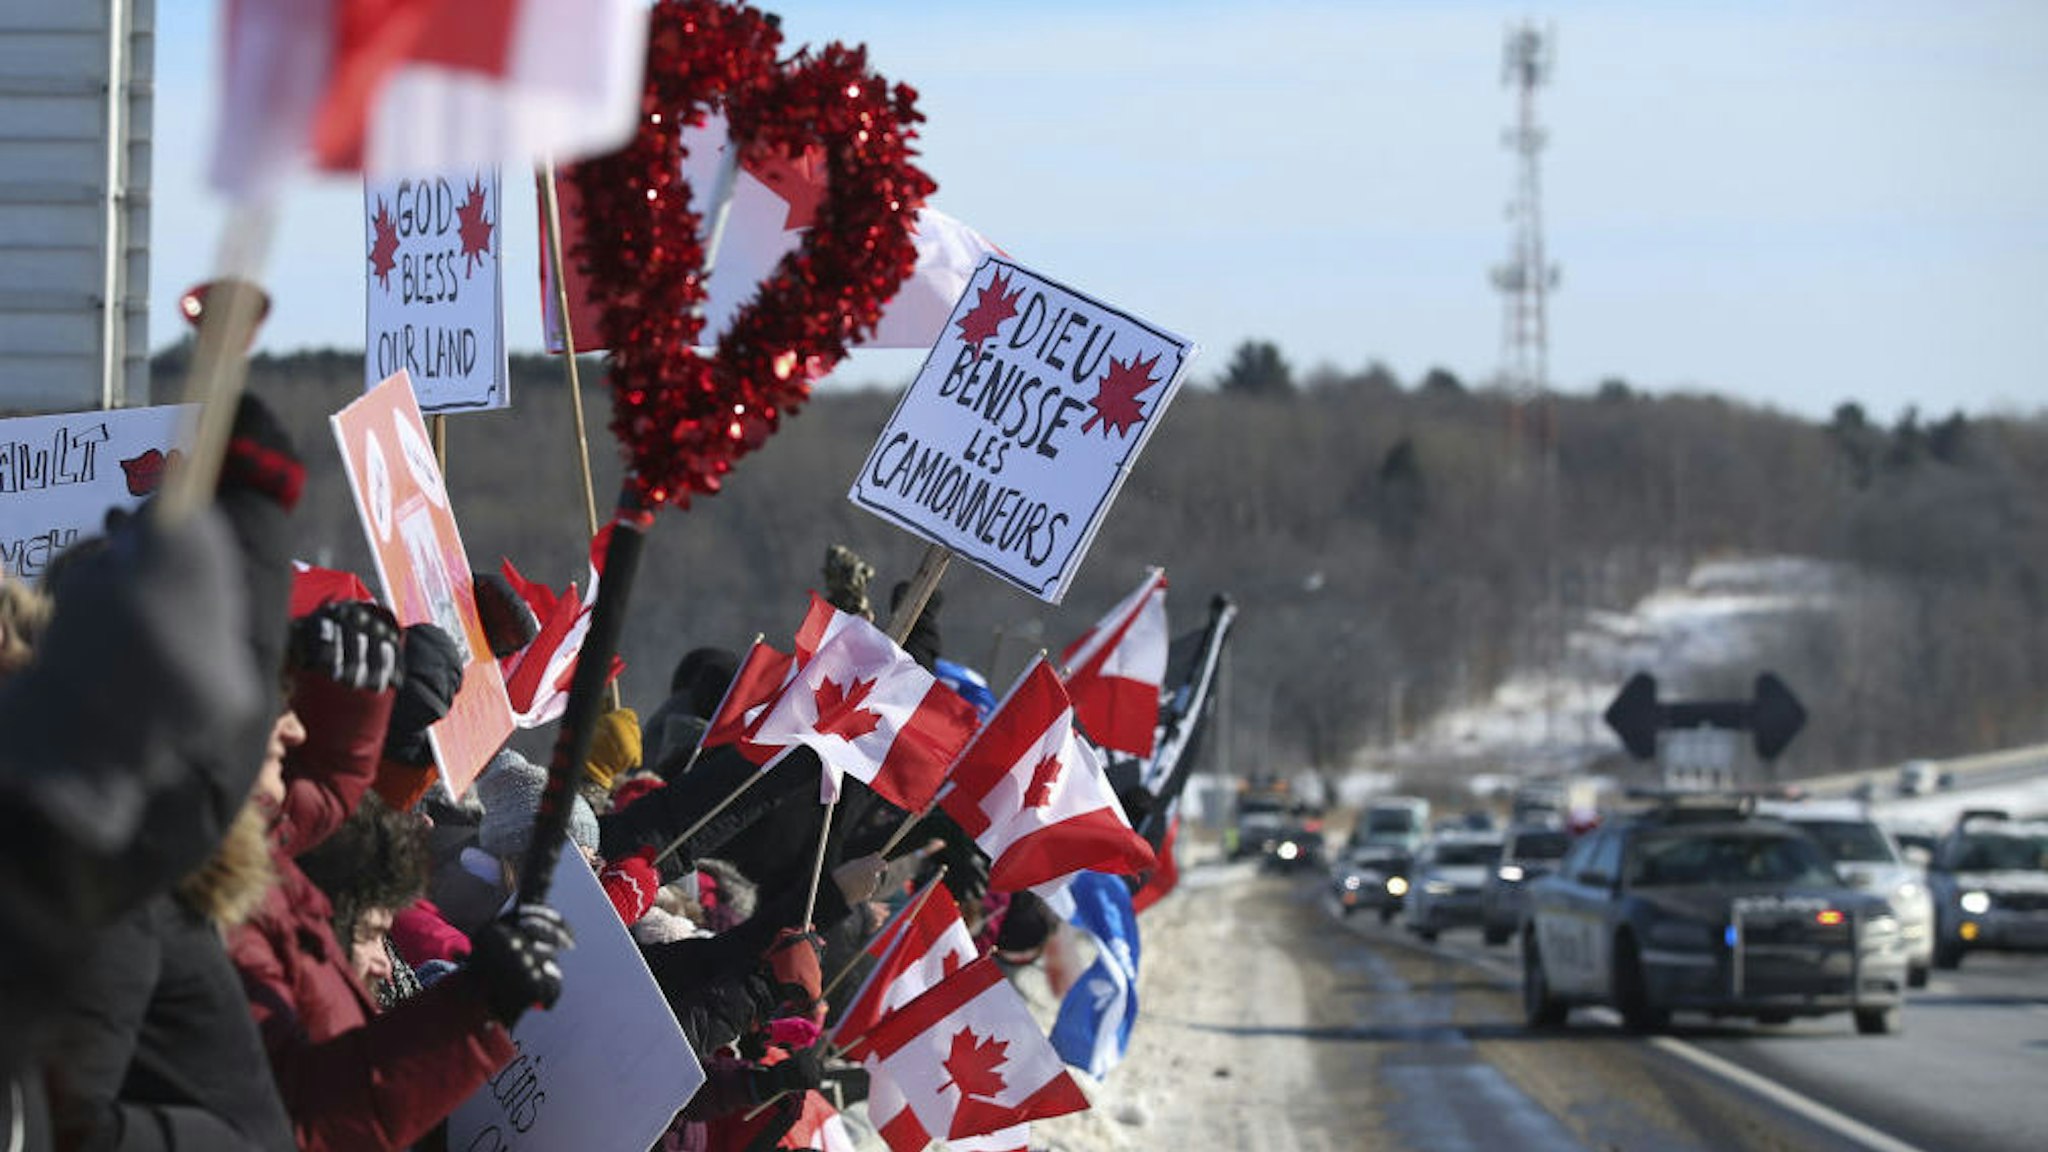 Supporters hold signs as a convoy of trucks passes on the highway in Rigaud, Quebec, Canada, on Friday, Jan. 28, 2022.